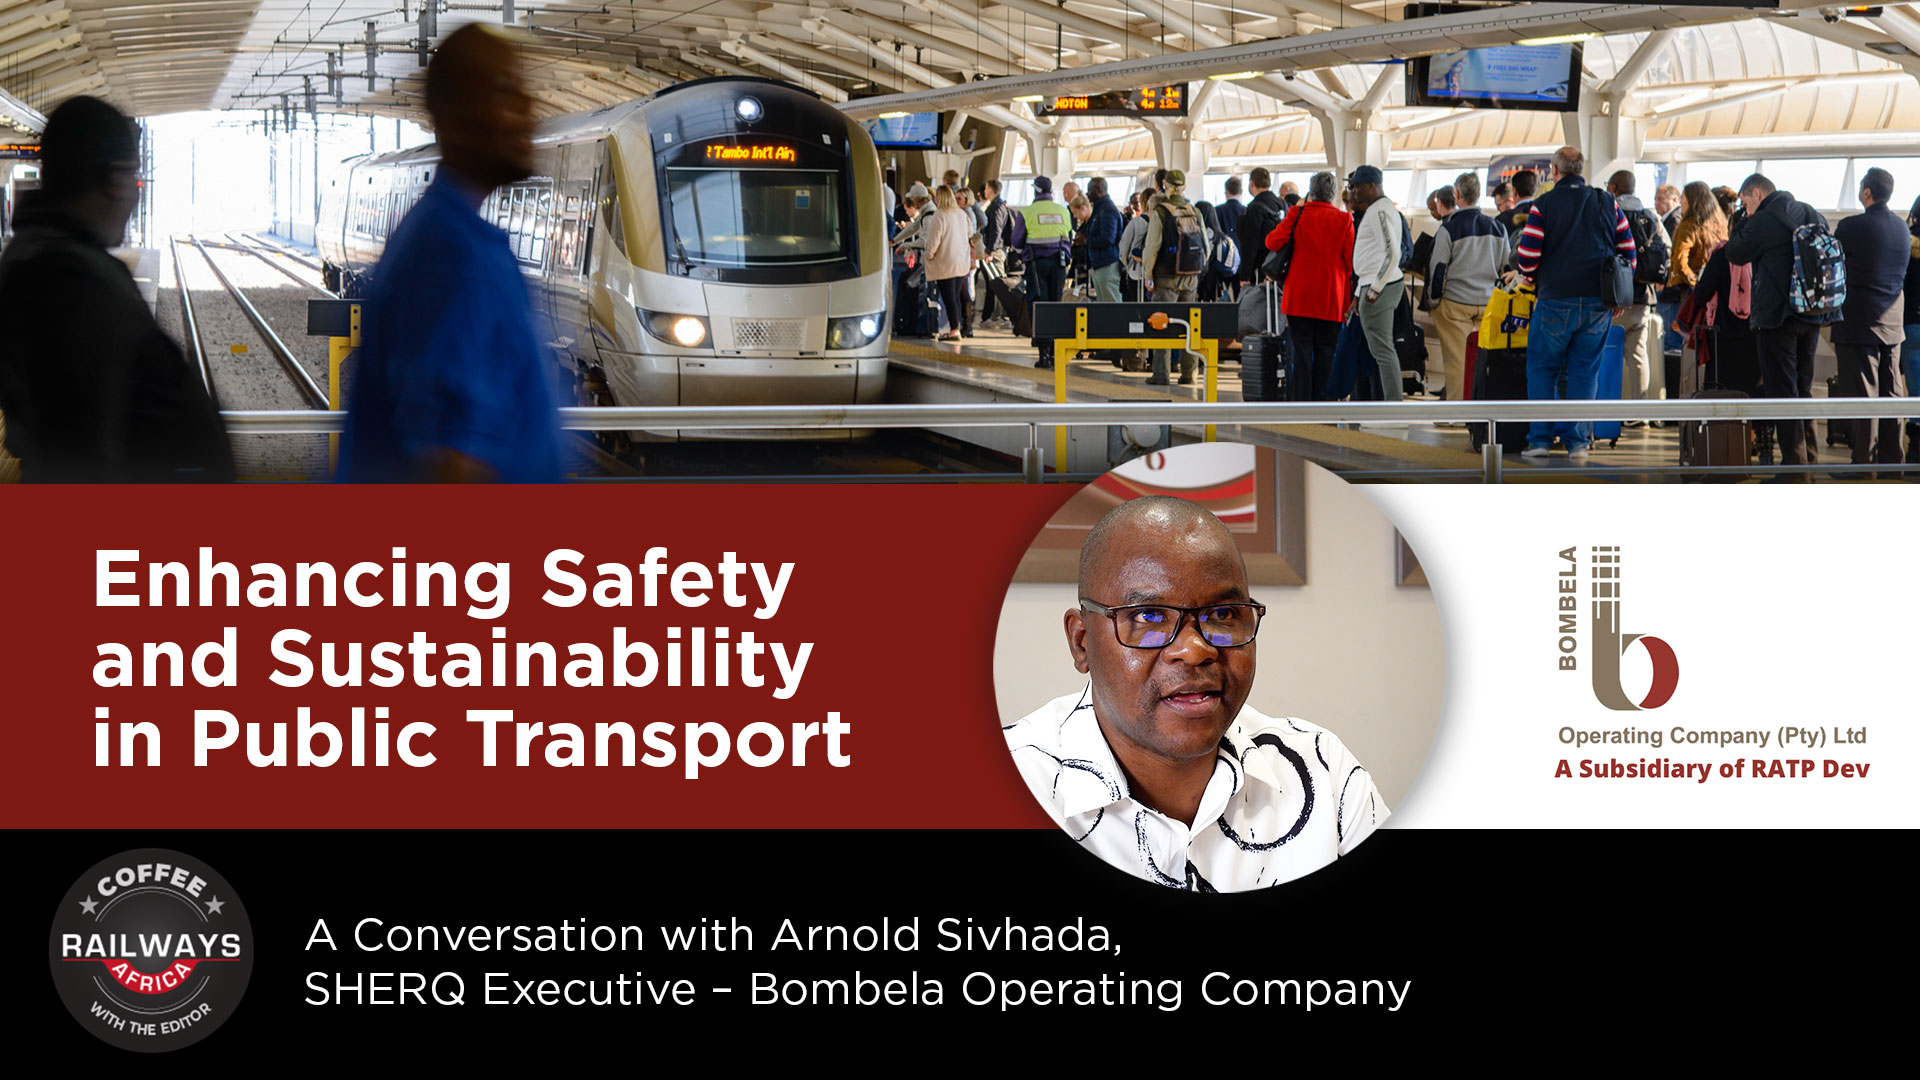 Bombela Operating Company Delivers World-Class Public Transport Safety